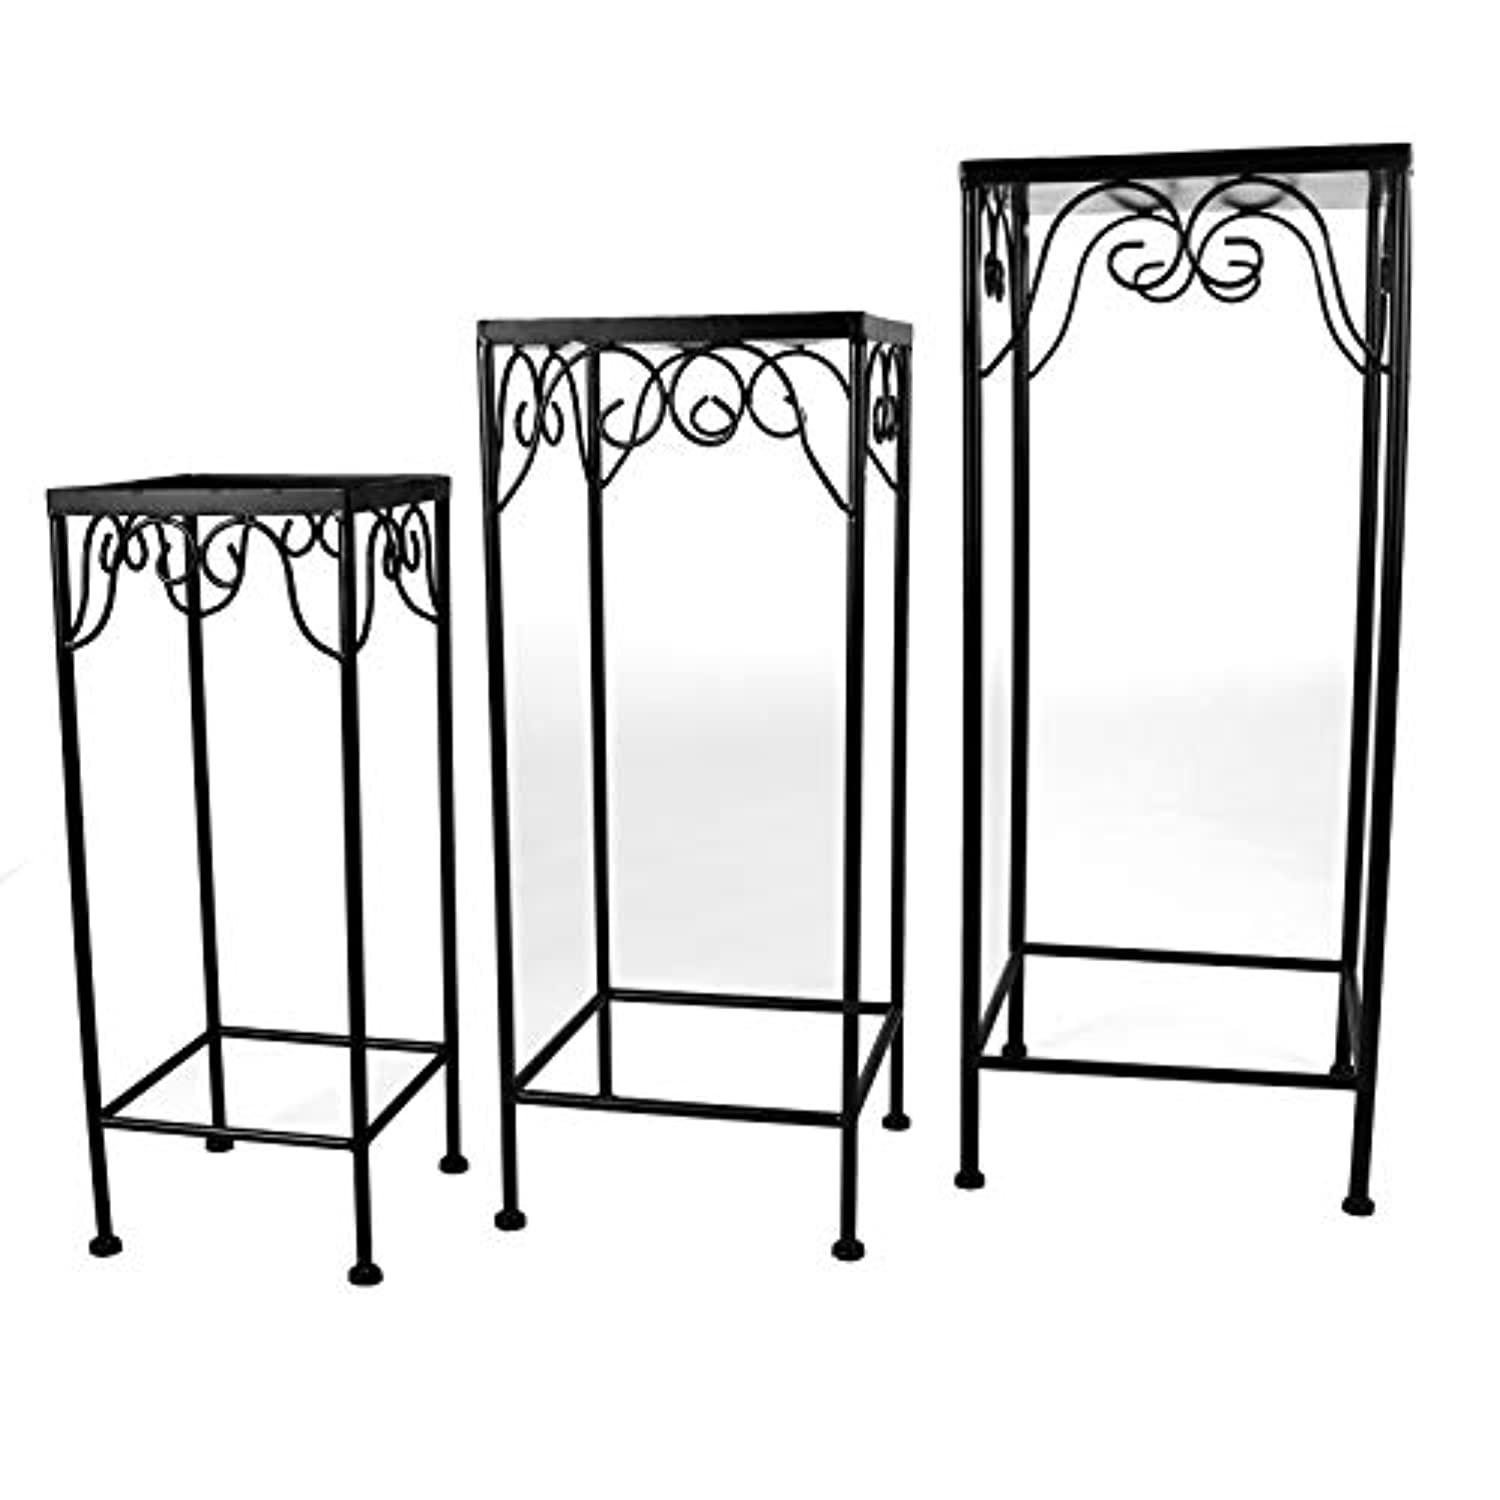 milltown merchants plant stands - set of 3 metal plant stands - indoor/outdoor nesting wrought iron end tables - square black